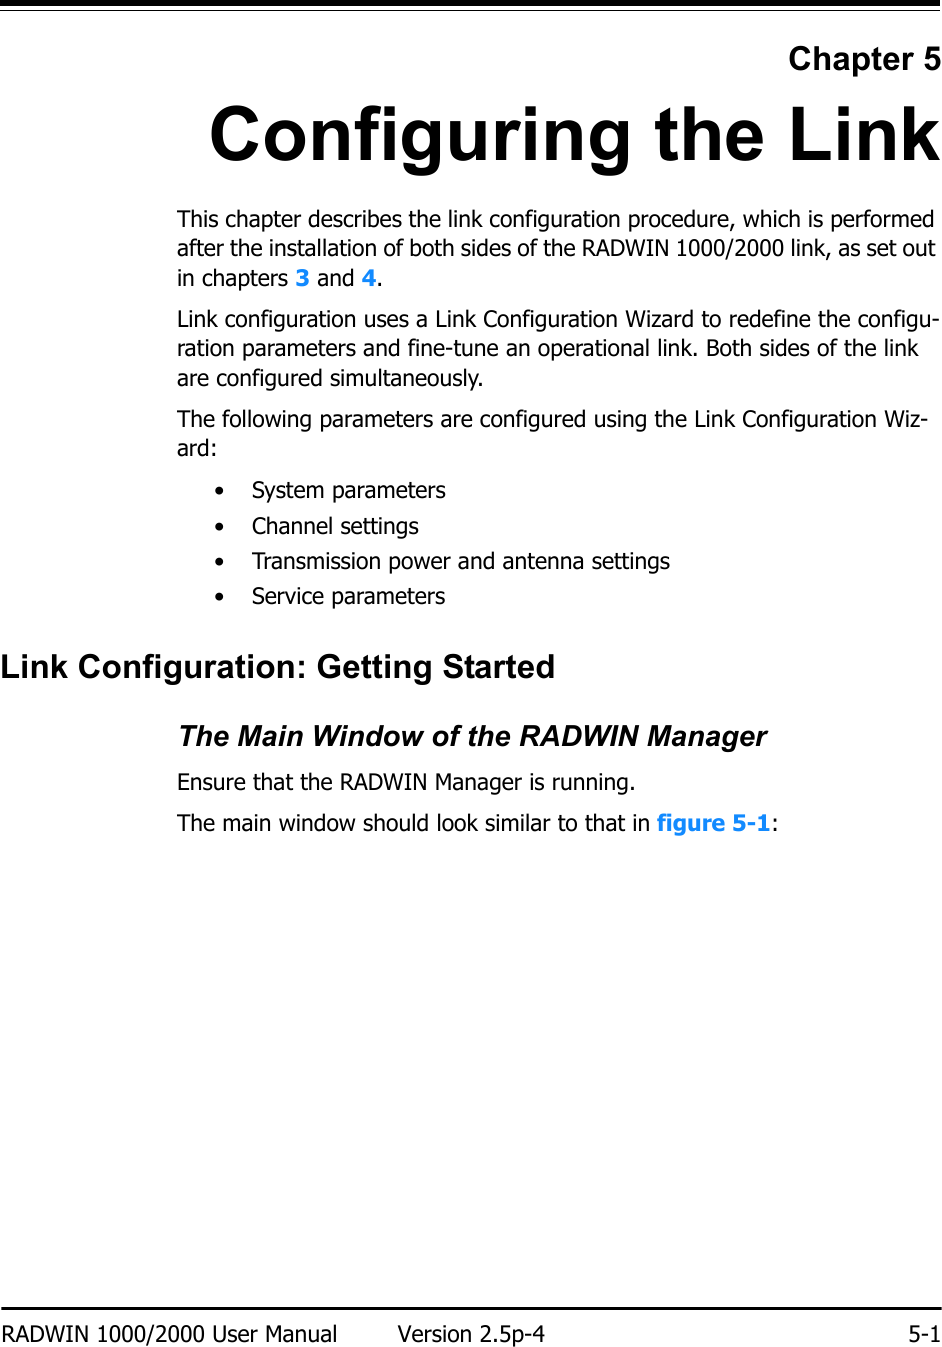 RADWIN 1000/2000 User Manual Version 2.5p-4 5-1Chapter 5Configuring the LinkThis chapter describes the link configuration procedure, which is performed after the installation of both sides of the RADWIN 1000/2000 link, as set out in chapters 3 and 4.Link configuration uses a Link Configuration Wizard to redefine the configu-ration parameters and fine-tune an operational link. Both sides of the link are configured simultaneously.The following parameters are configured using the Link Configuration Wiz-ard:• System parameters• Channel settings• Transmission power and antenna settings•Service parametersLink Configuration: Getting StartedThe Main Window of the RADWIN ManagerEnsure that the RADWIN Manager is running.The main window should look similar to that in figure 5-1: